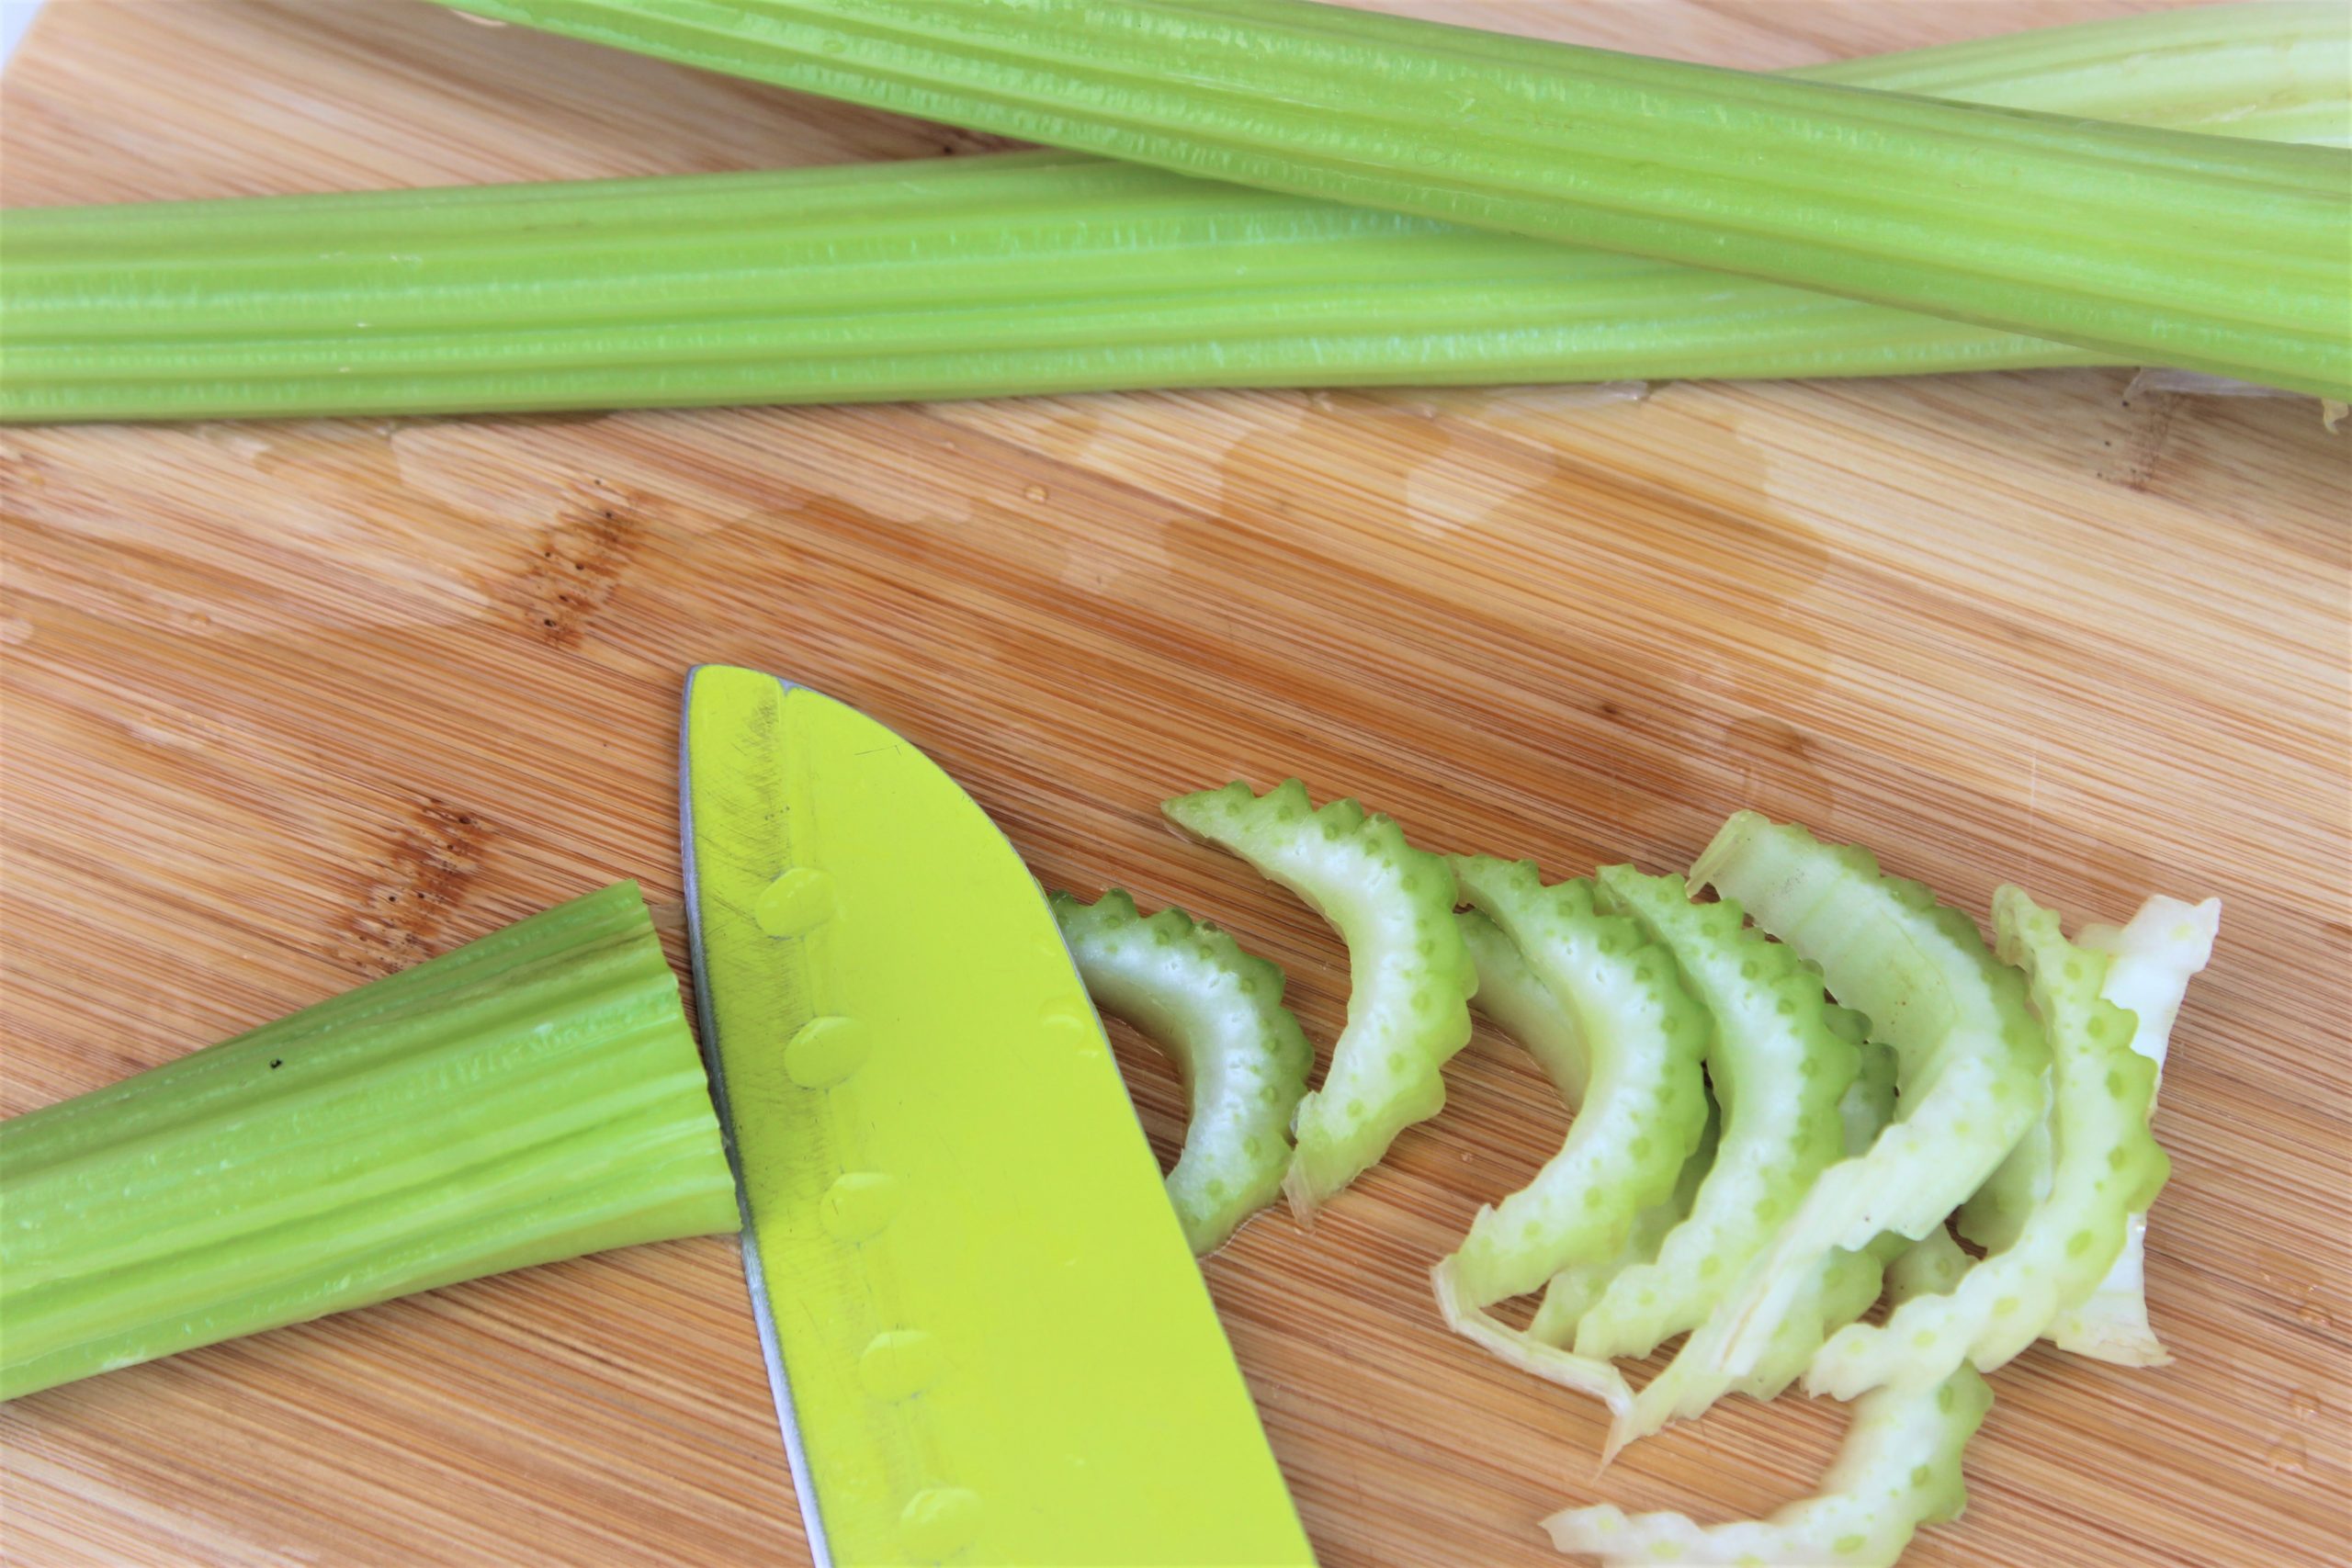 Thinly sliced celery on chopping board with a knife.